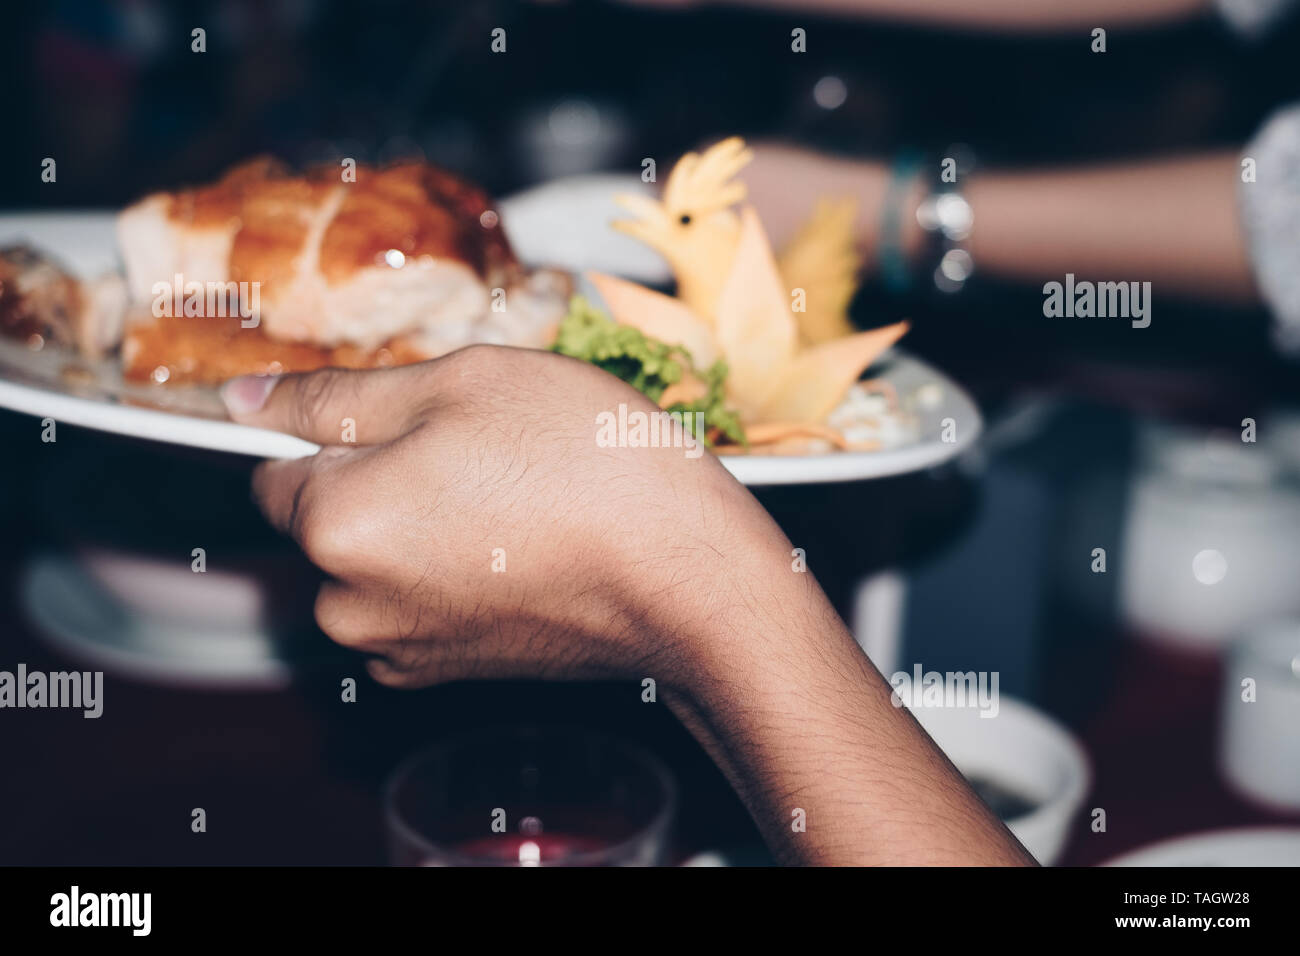 Hand holding a chicken dish to be passed around the table. Selective focus. Stock Photo